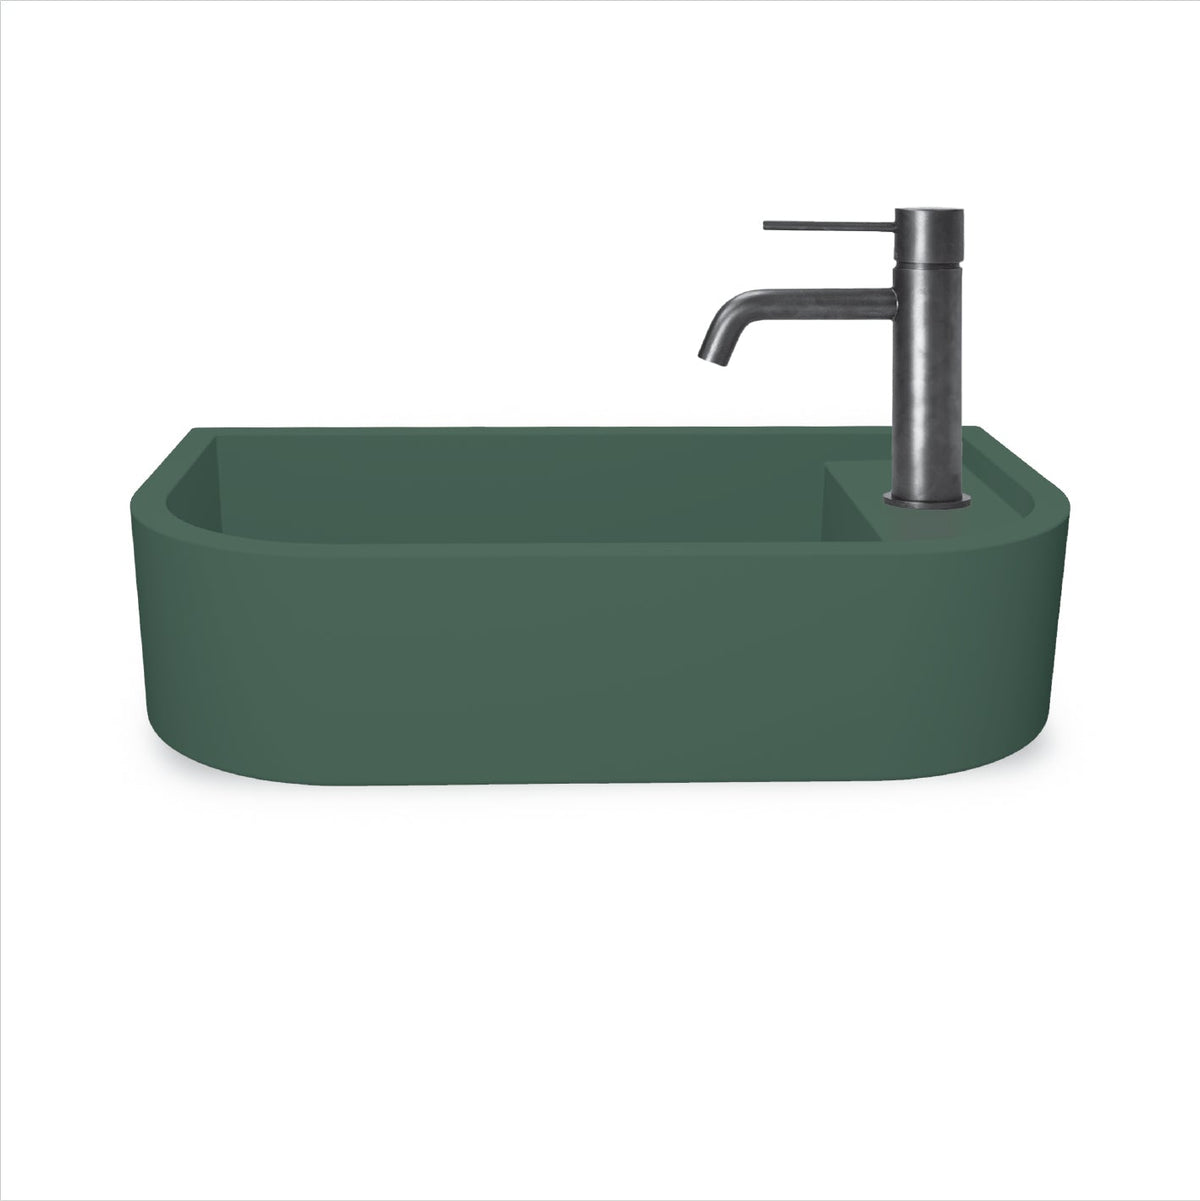 Loop 02 Basin - Overflow - Wall Hung (Teal,Tap Hole,White)